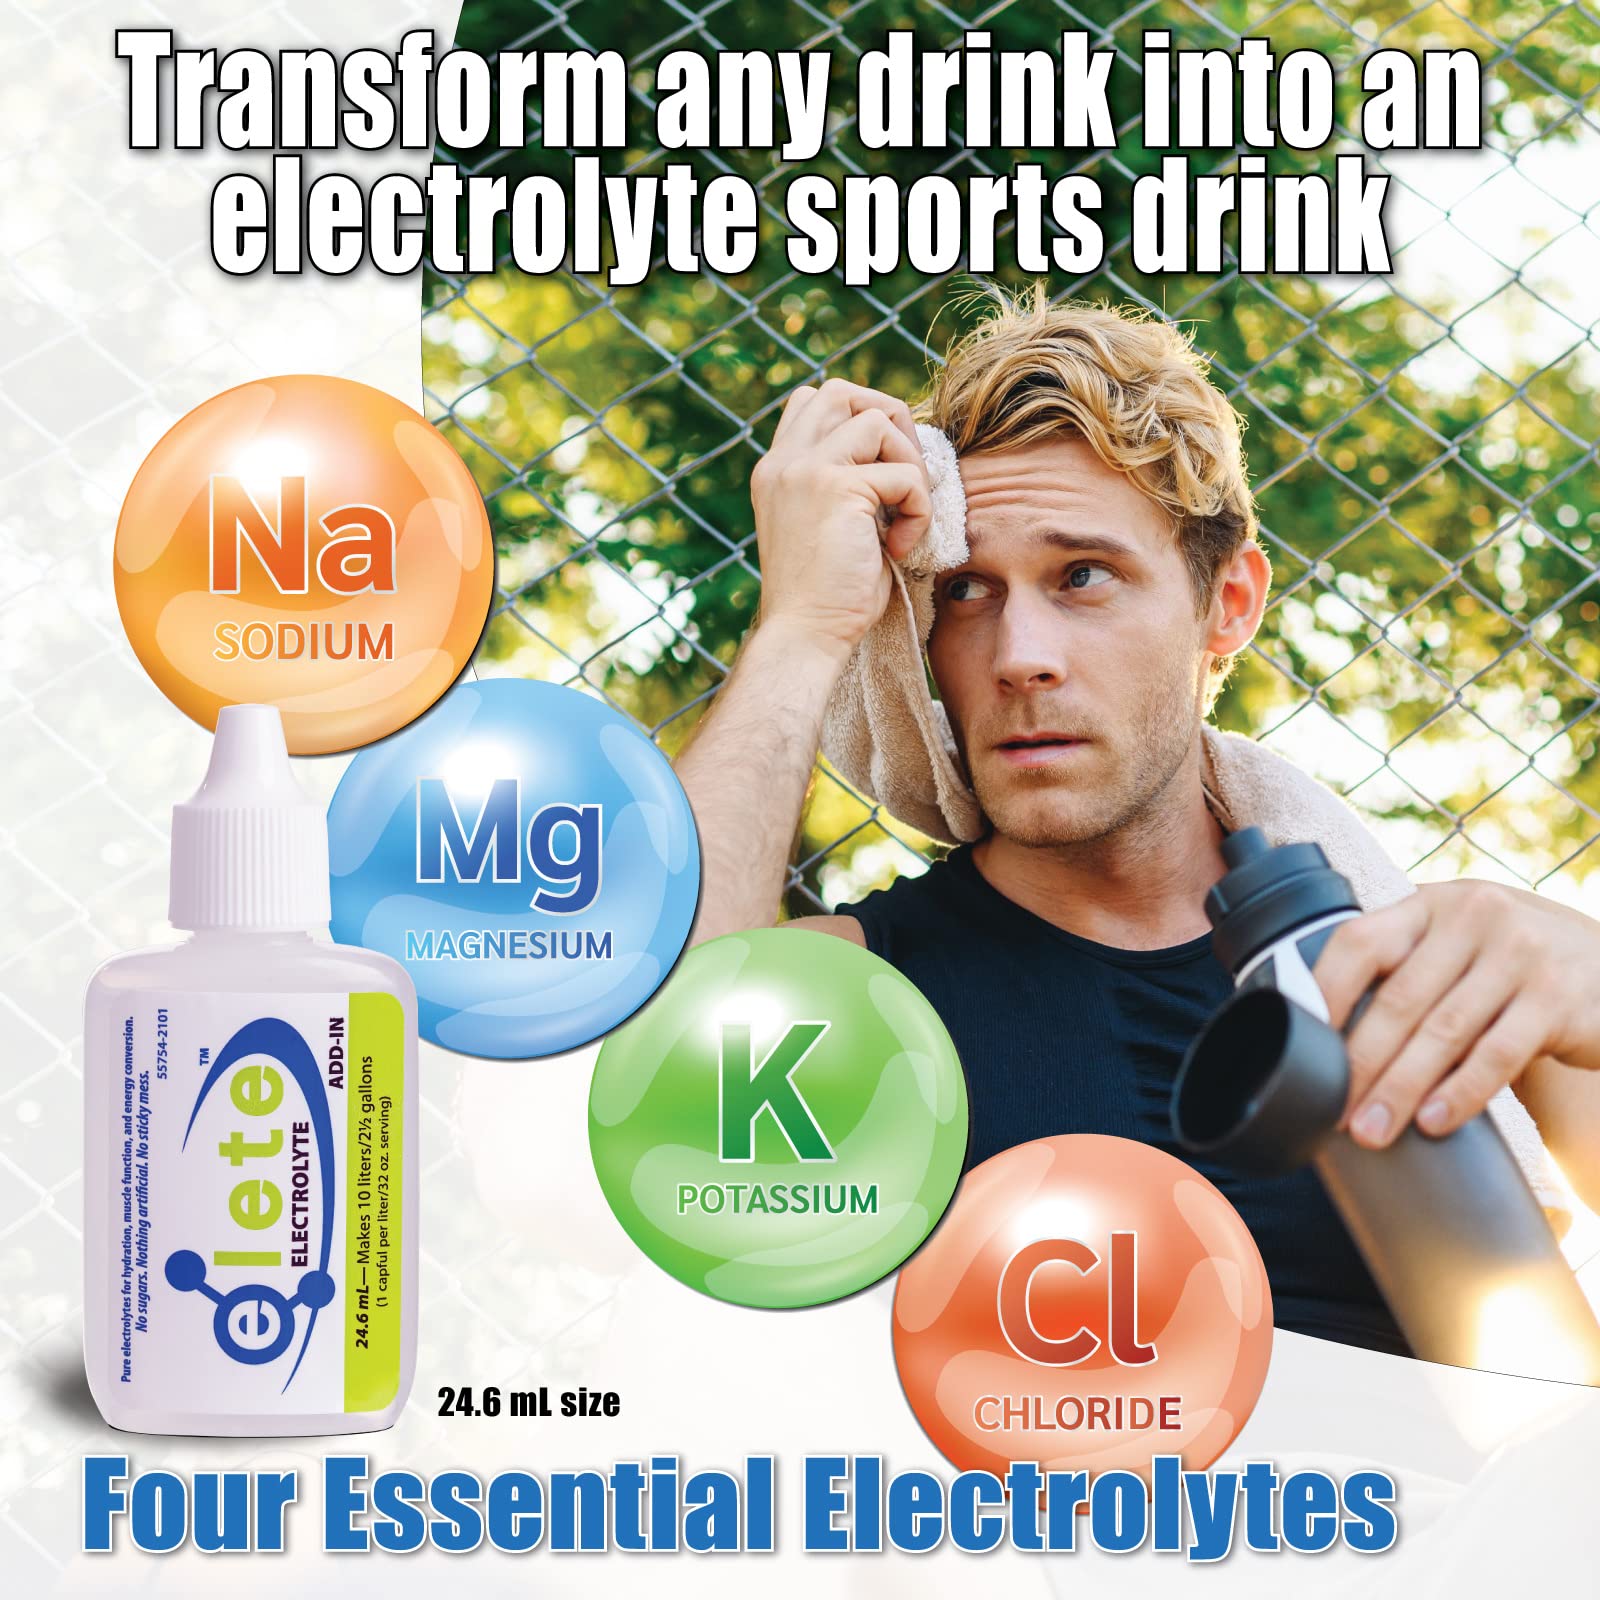 elete Electrolyte Add-in Hydration Drops | Pocket Bottle | Sodium, Magnesium, Potassium & Trace Minerals | Unflavored, All Natural | Leg & Muscle Cramp Relief | Transform Any Drink into a Sports Drink, 24.6mL